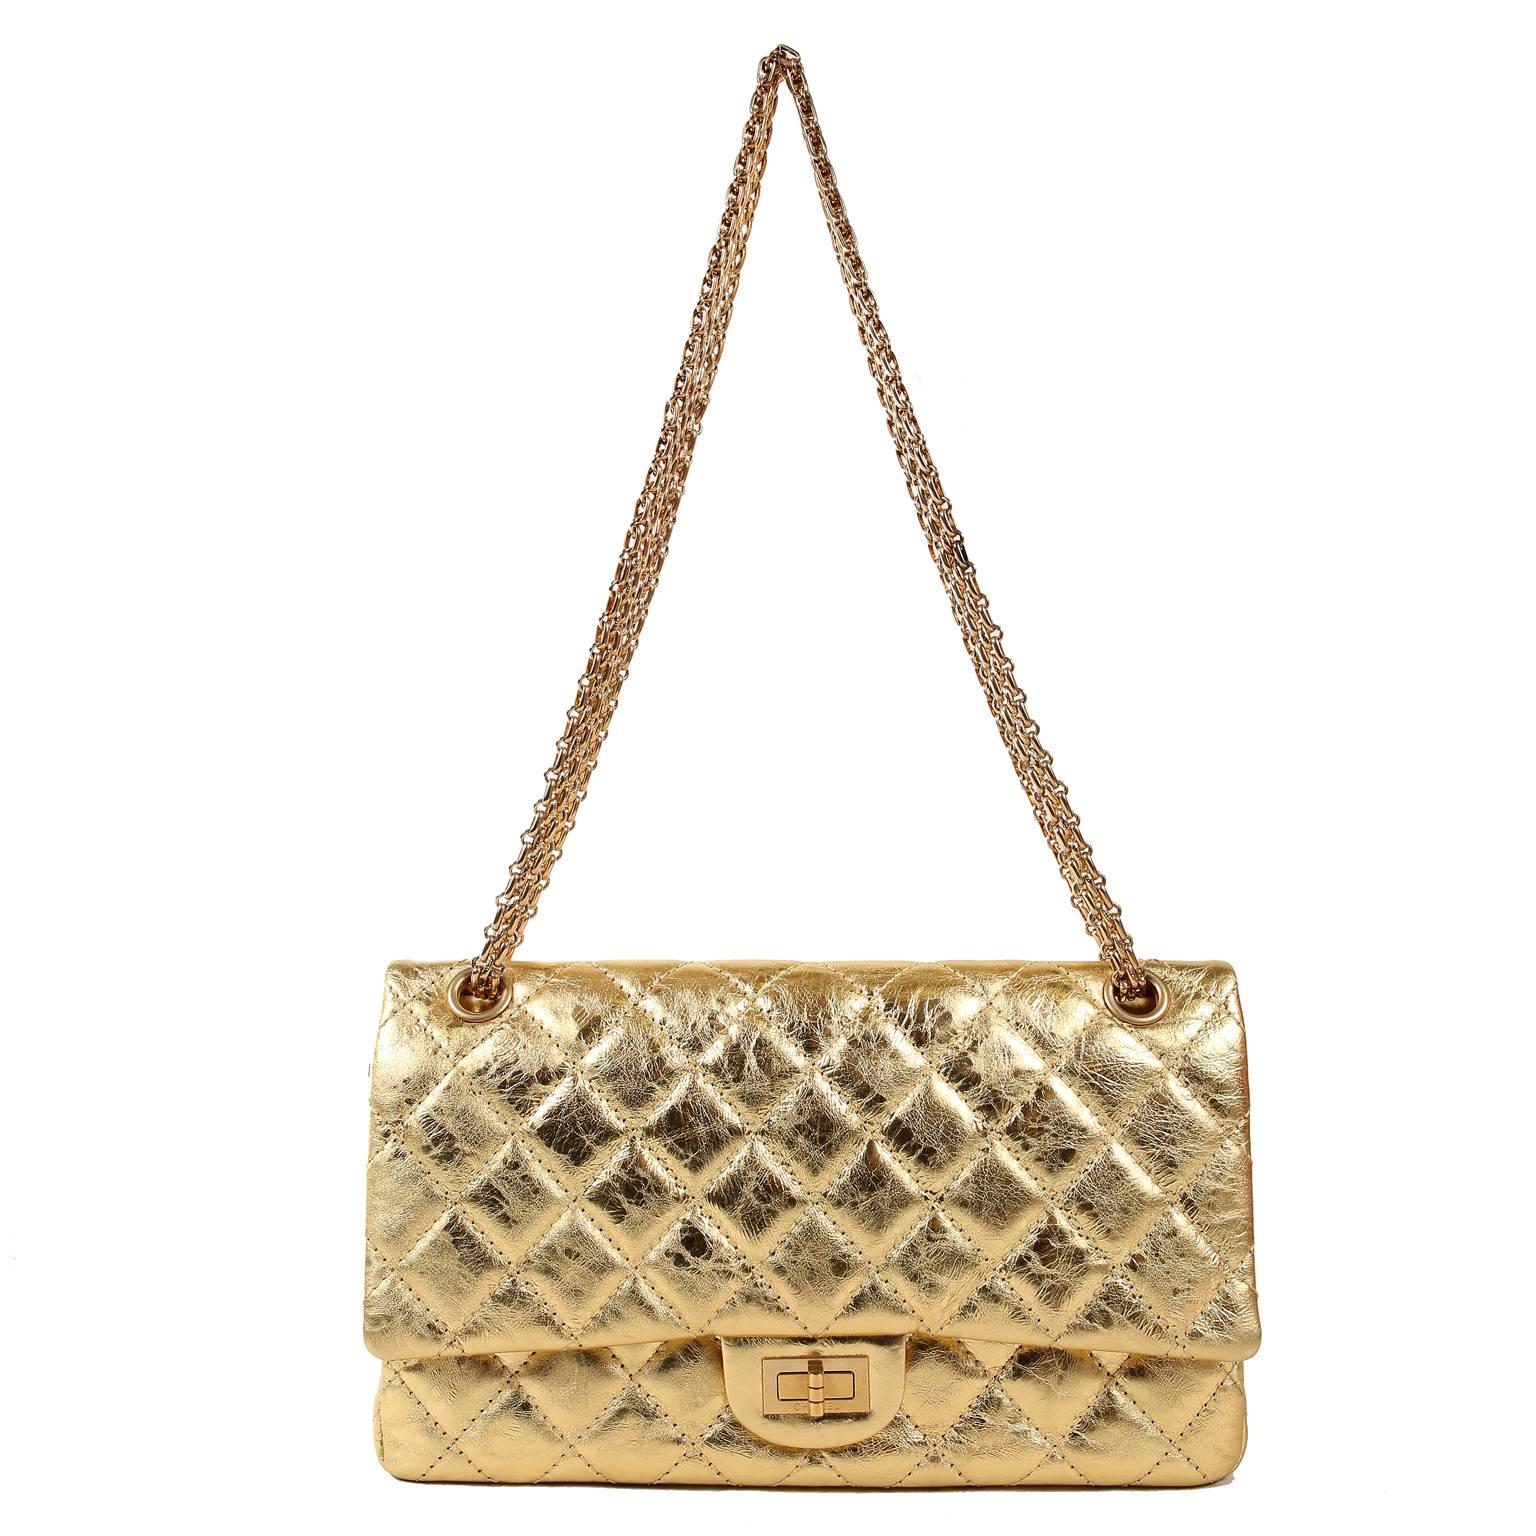 Chanel Metallic Gold Leather Reissue Flap Bag 6